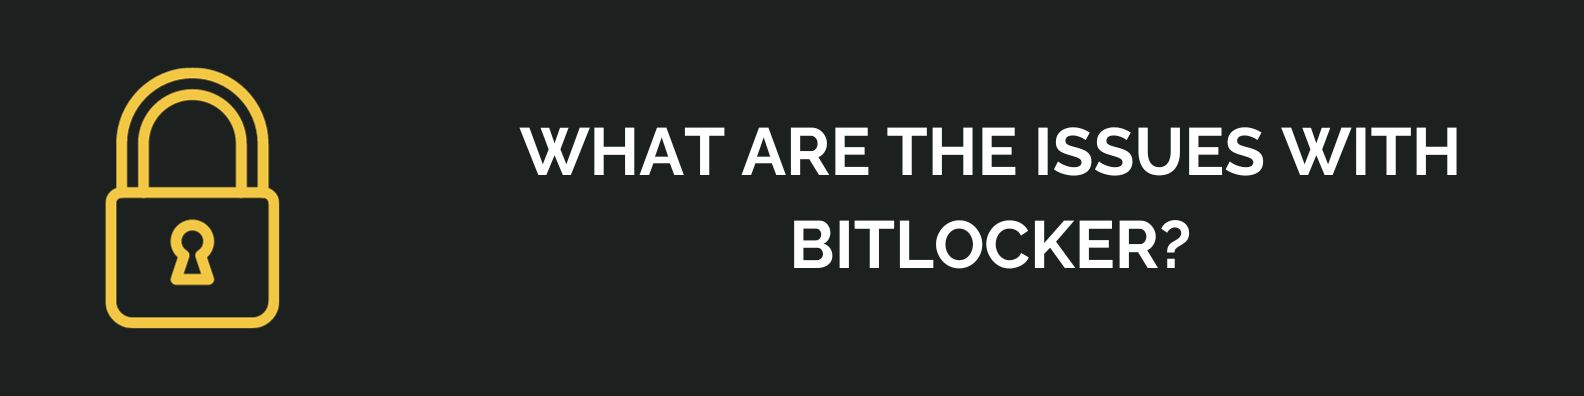 What Are the Issues With BitLocker?